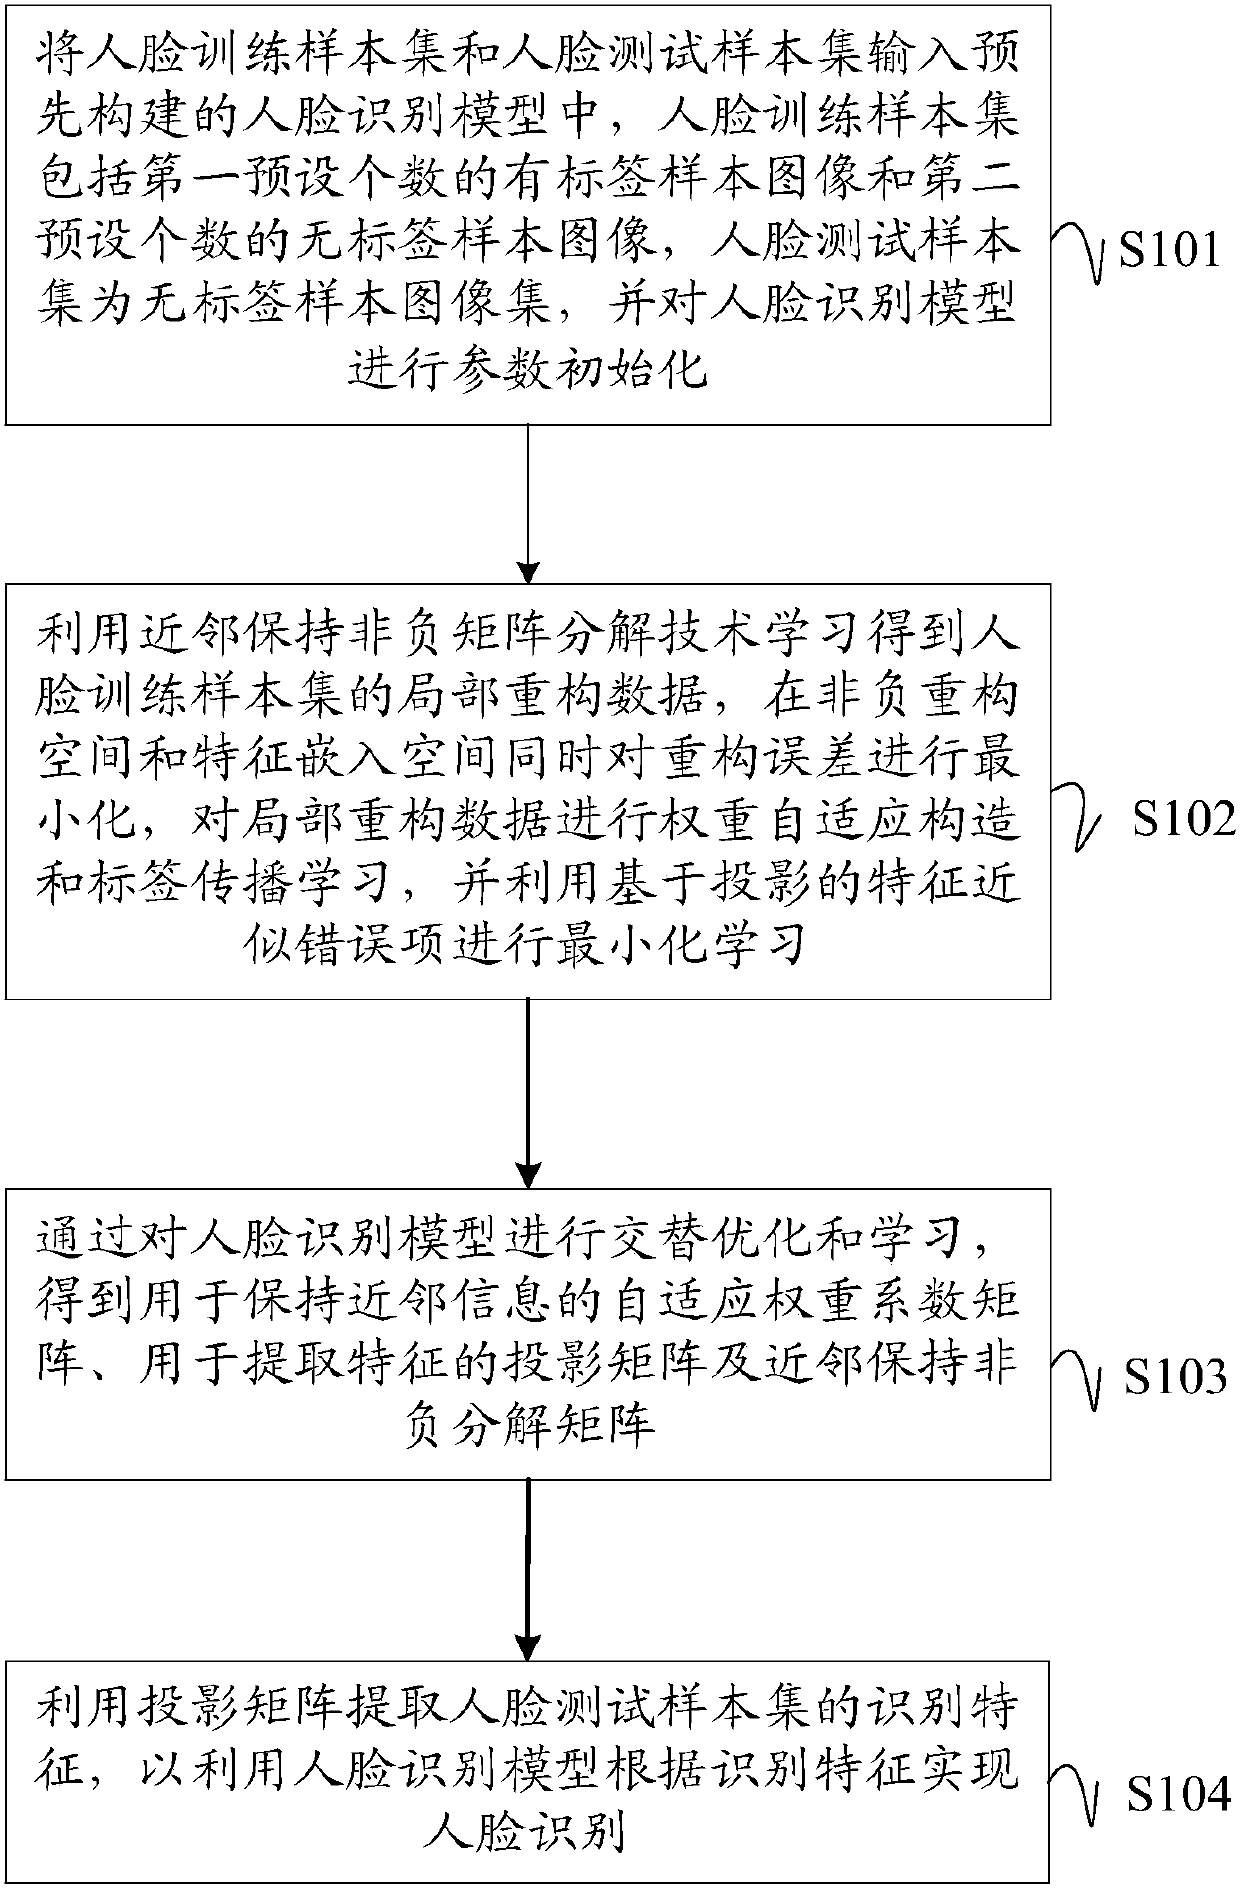 Non-negative adaptive feature extraction-based human face identification method, device and equipment